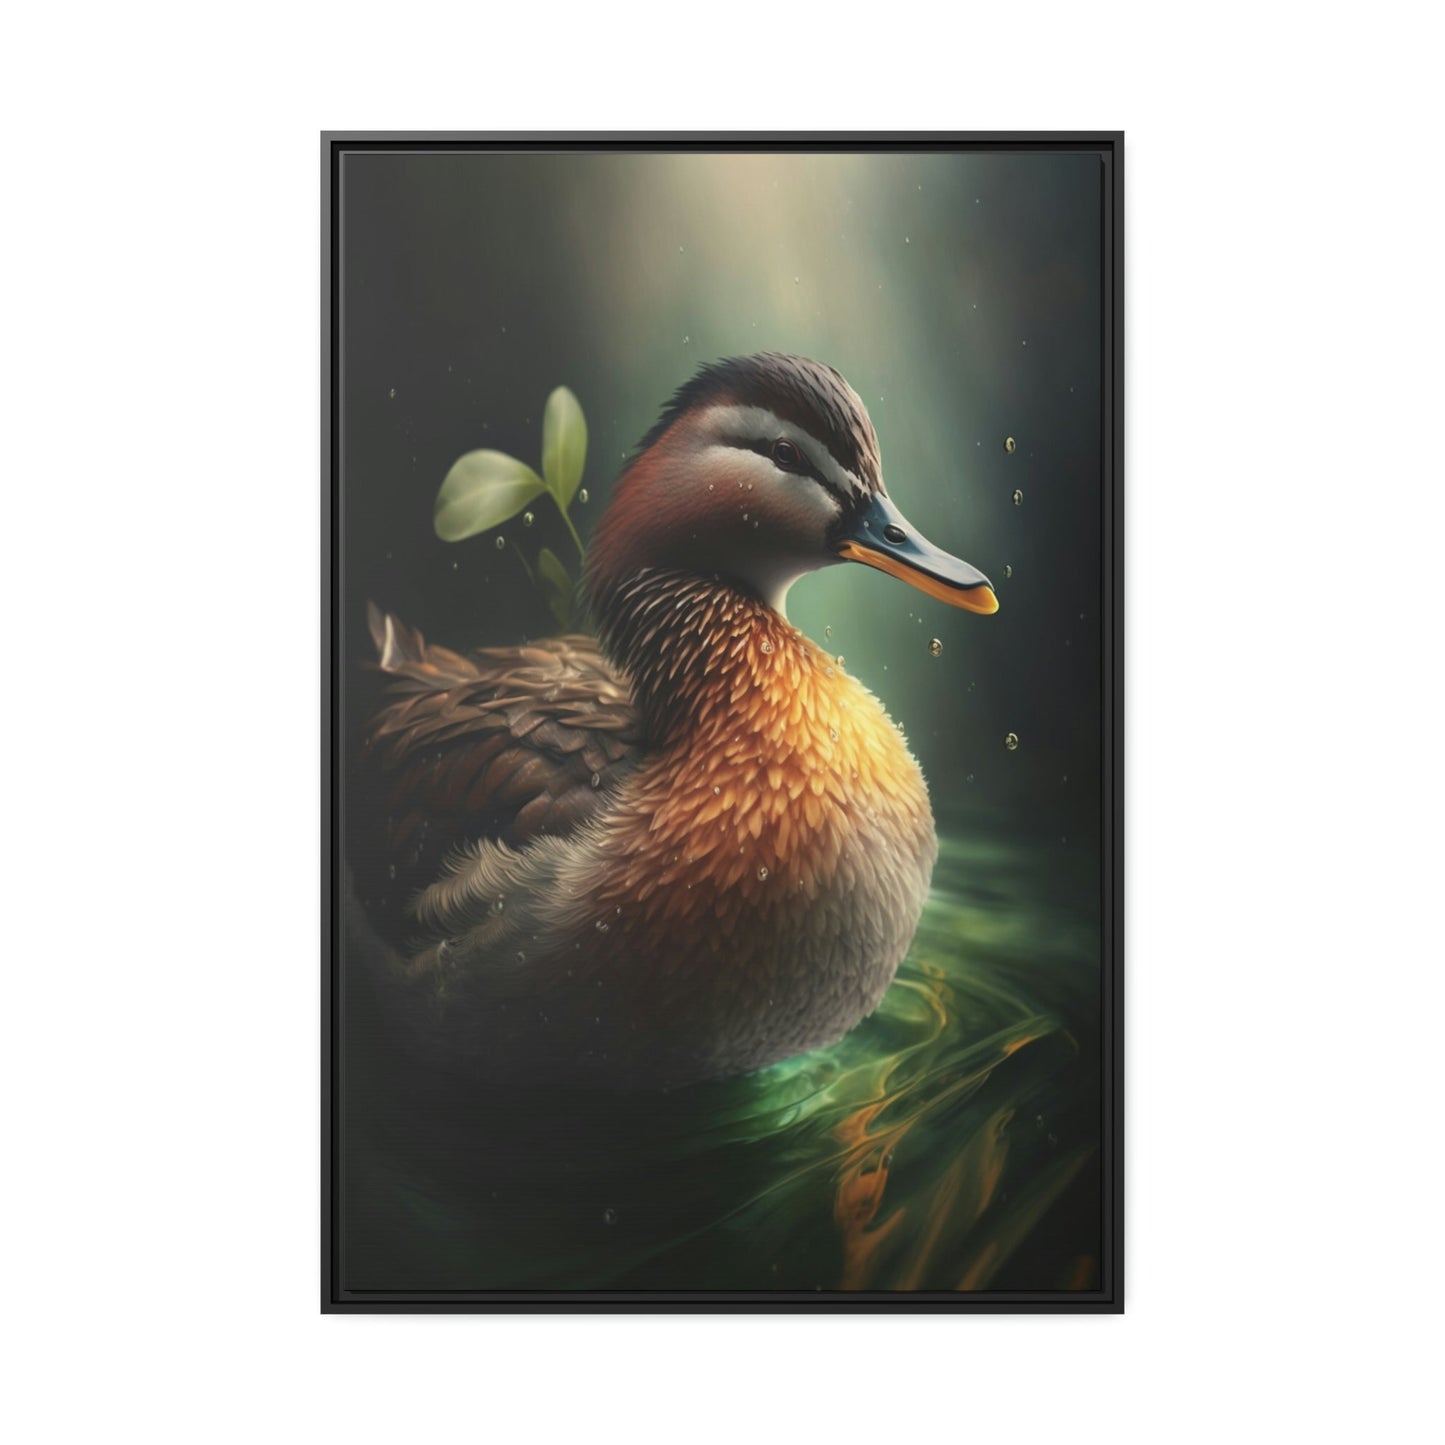 Graceful Waterfowl: A Painting of Duck in Motion